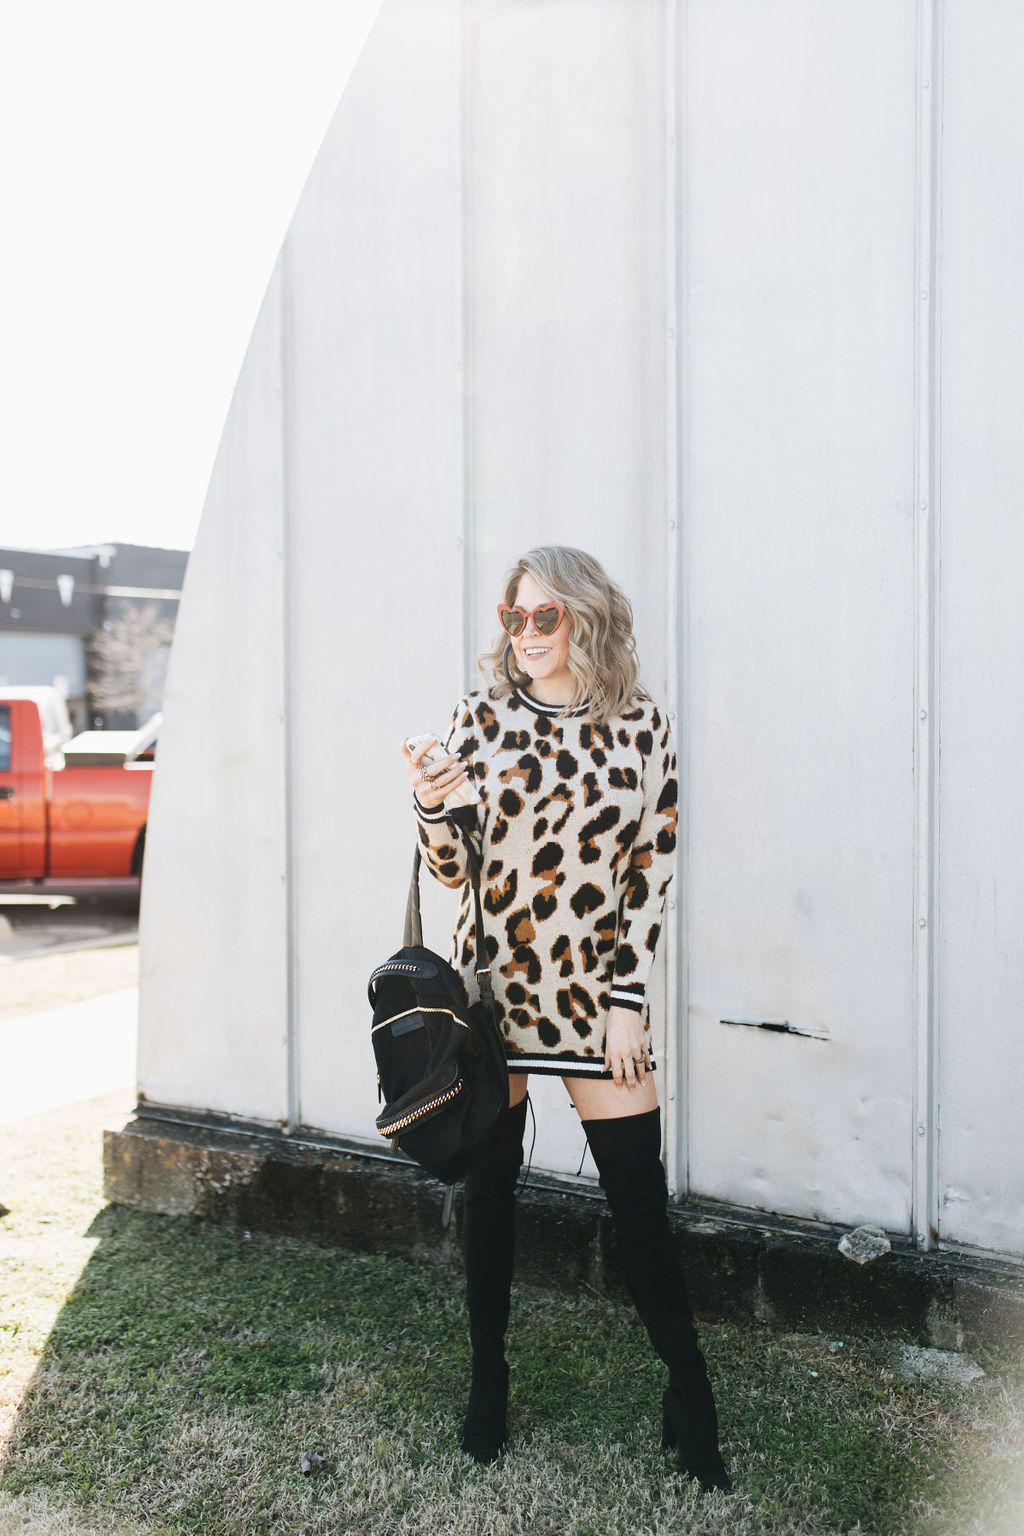 Looking for TRENDY Valentine's Day outfit ideas? Style Blogger Life Lutzurious styles this ADORABLE leopard dress with black OTK boots and the cutest red heart-shaped sunnies you ever did see.